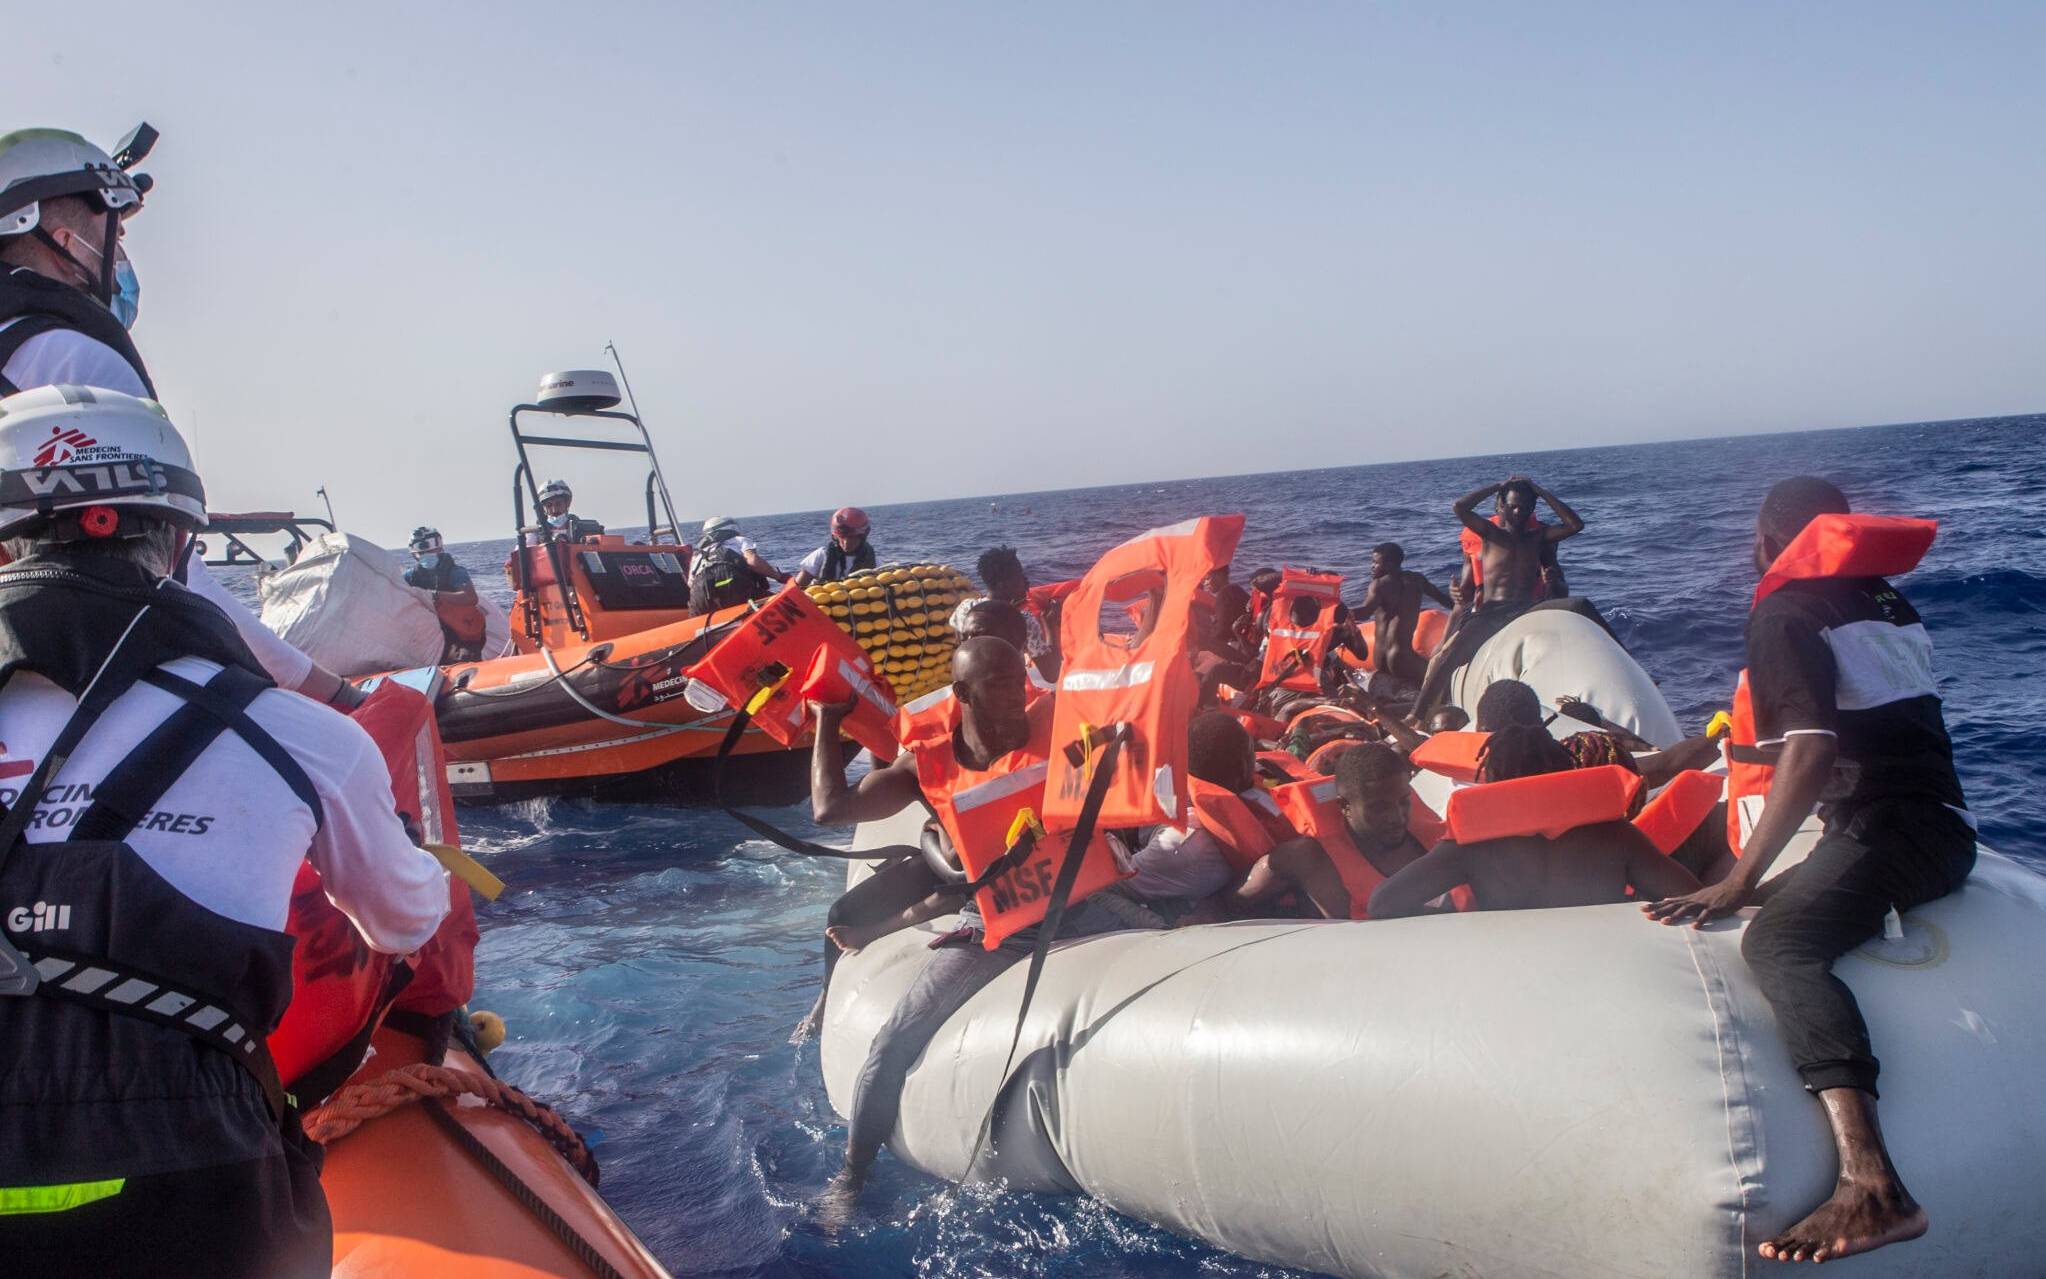 On the afternoon of June 27, the MSF team rescued 71 people from a rubber boat in distress. 22 people are missing, three persons were stabilized, including very young children, and one women died later on board after 30 minutes of resuscitation. A woman and her baby in critical state were also evacuated to Malta during the same night. This is another tragic rescue in the Central Mediterranean and everyone is in a very weak condition and traumatized. The MSF medical team on board is looking after the survivors until disembarkation in a place of safety.